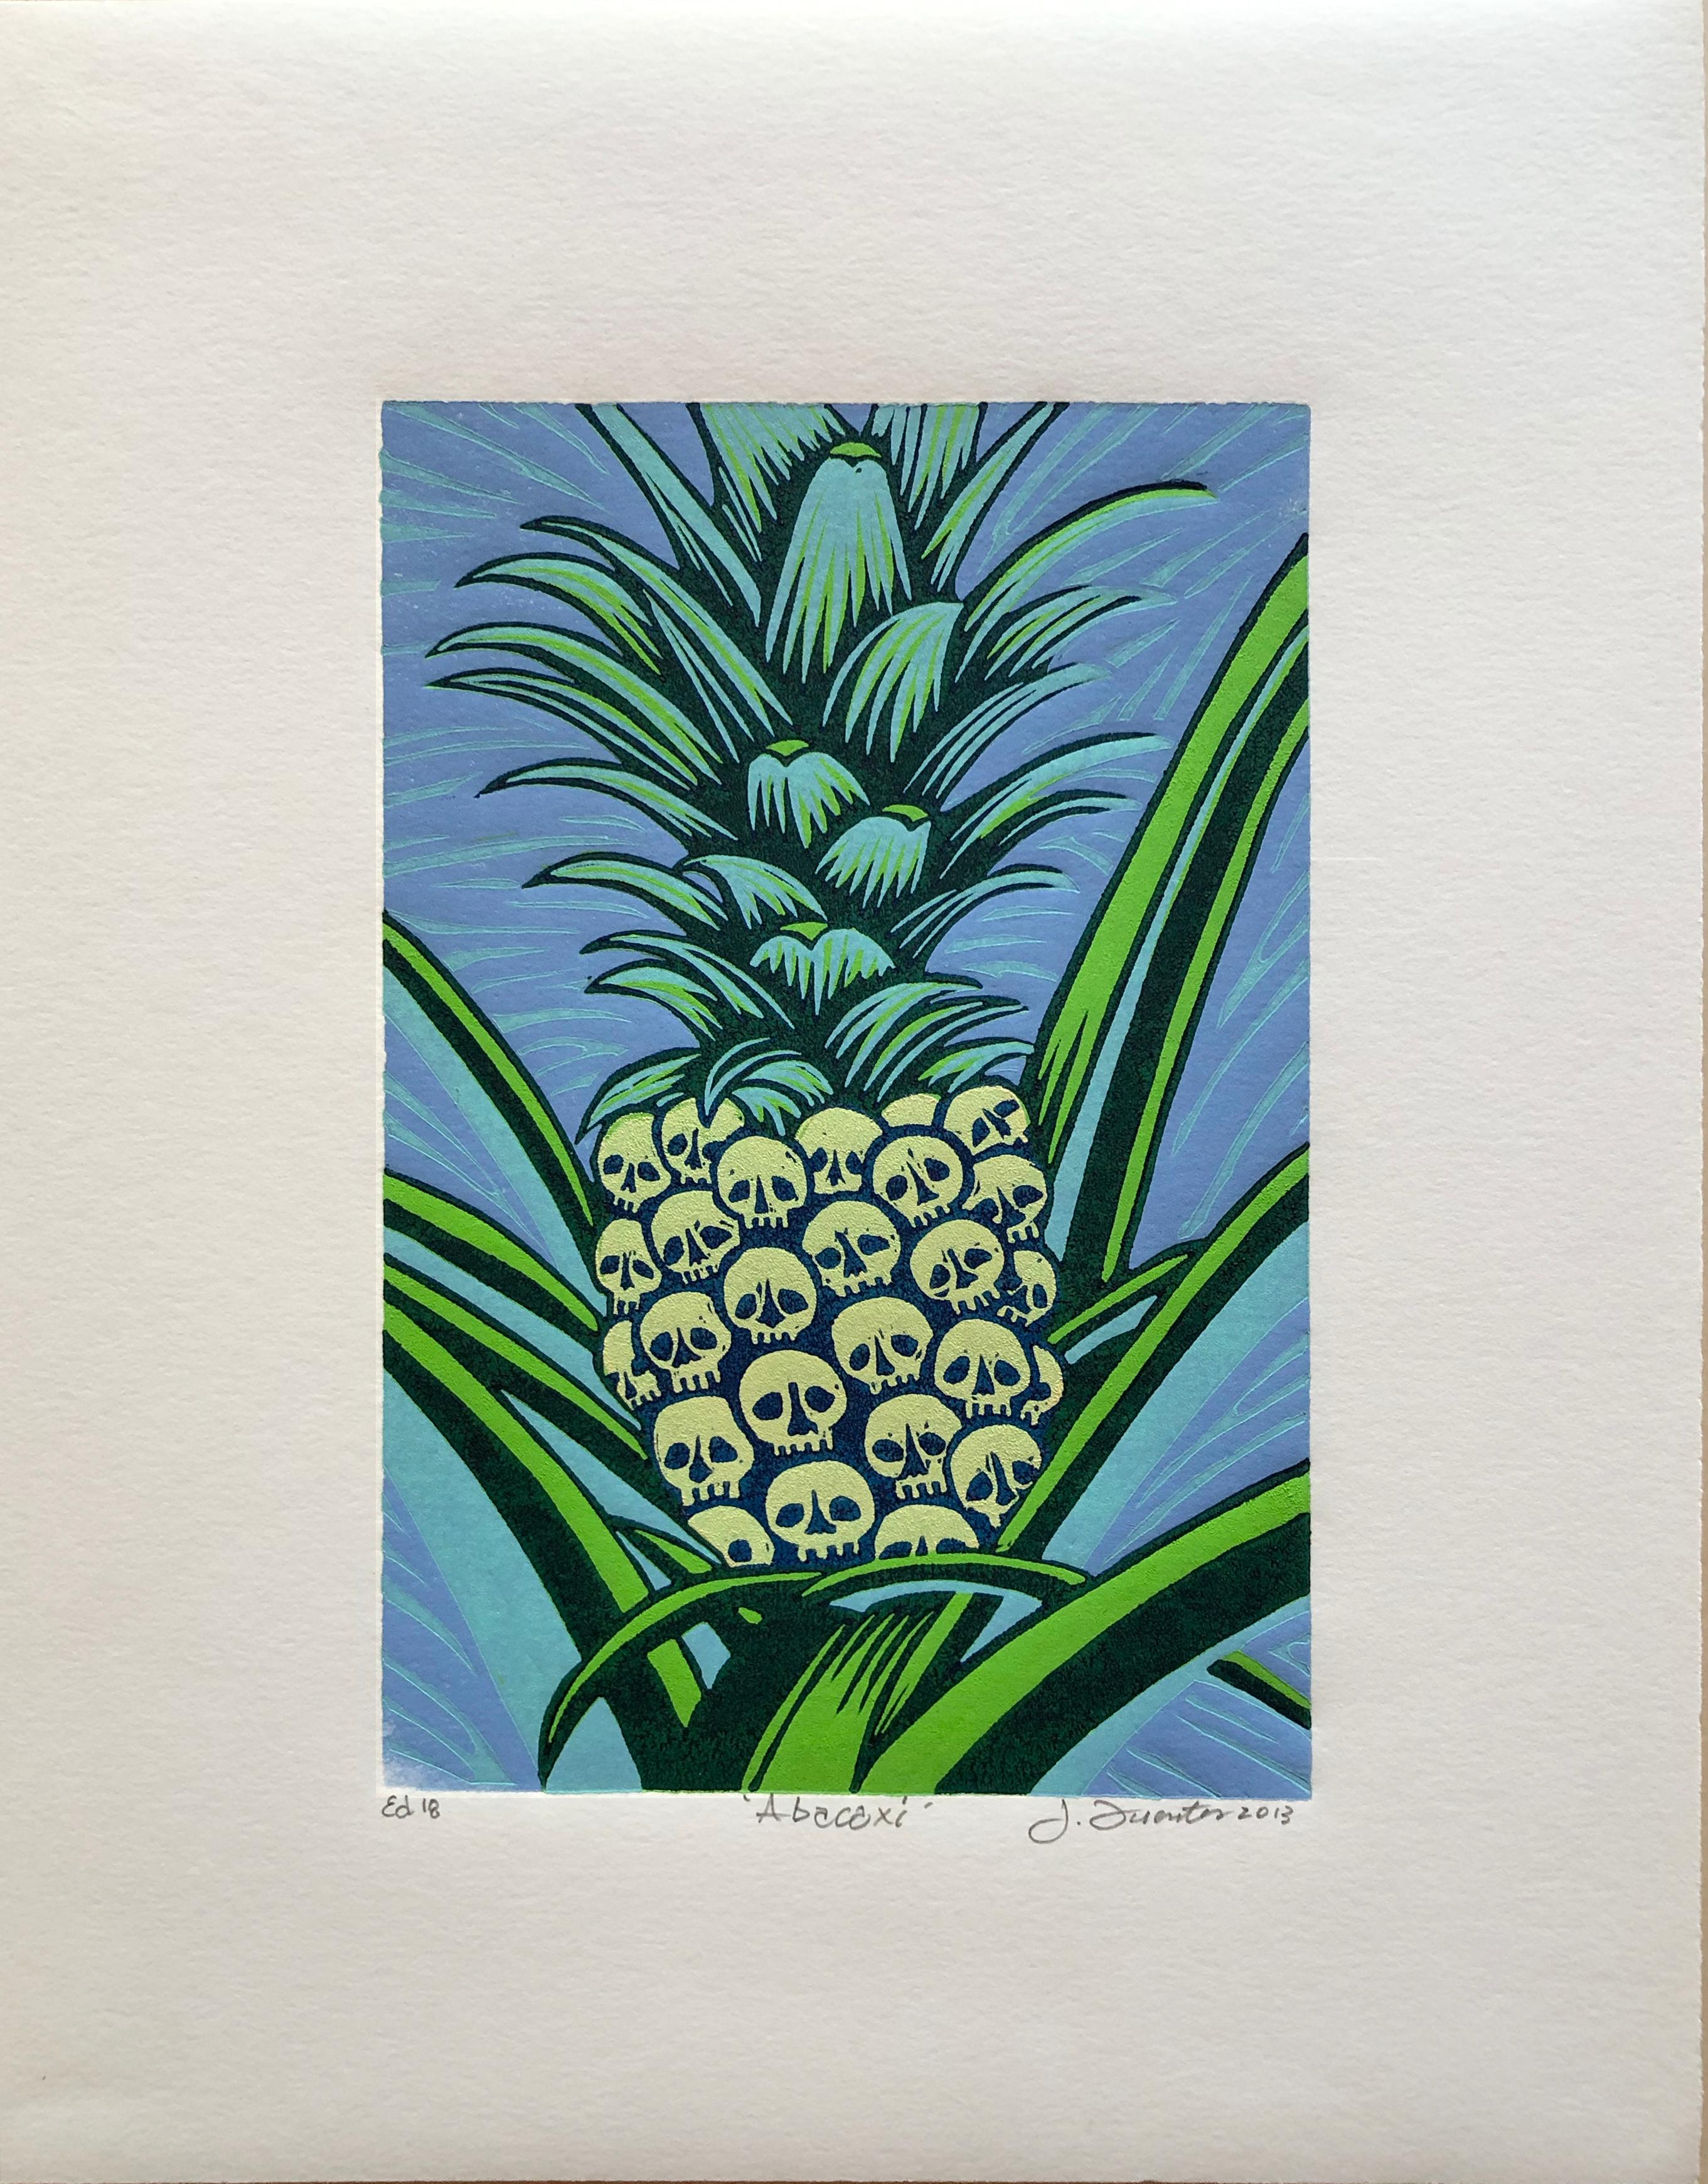 Signed and titled in pencil, an edition of only one print.   A  pineapple plant looking more like a day of the dead image. 

The turbulent times of the 70’s set the tone for Fuentes' approach to creating social art. The Chicano, African American,